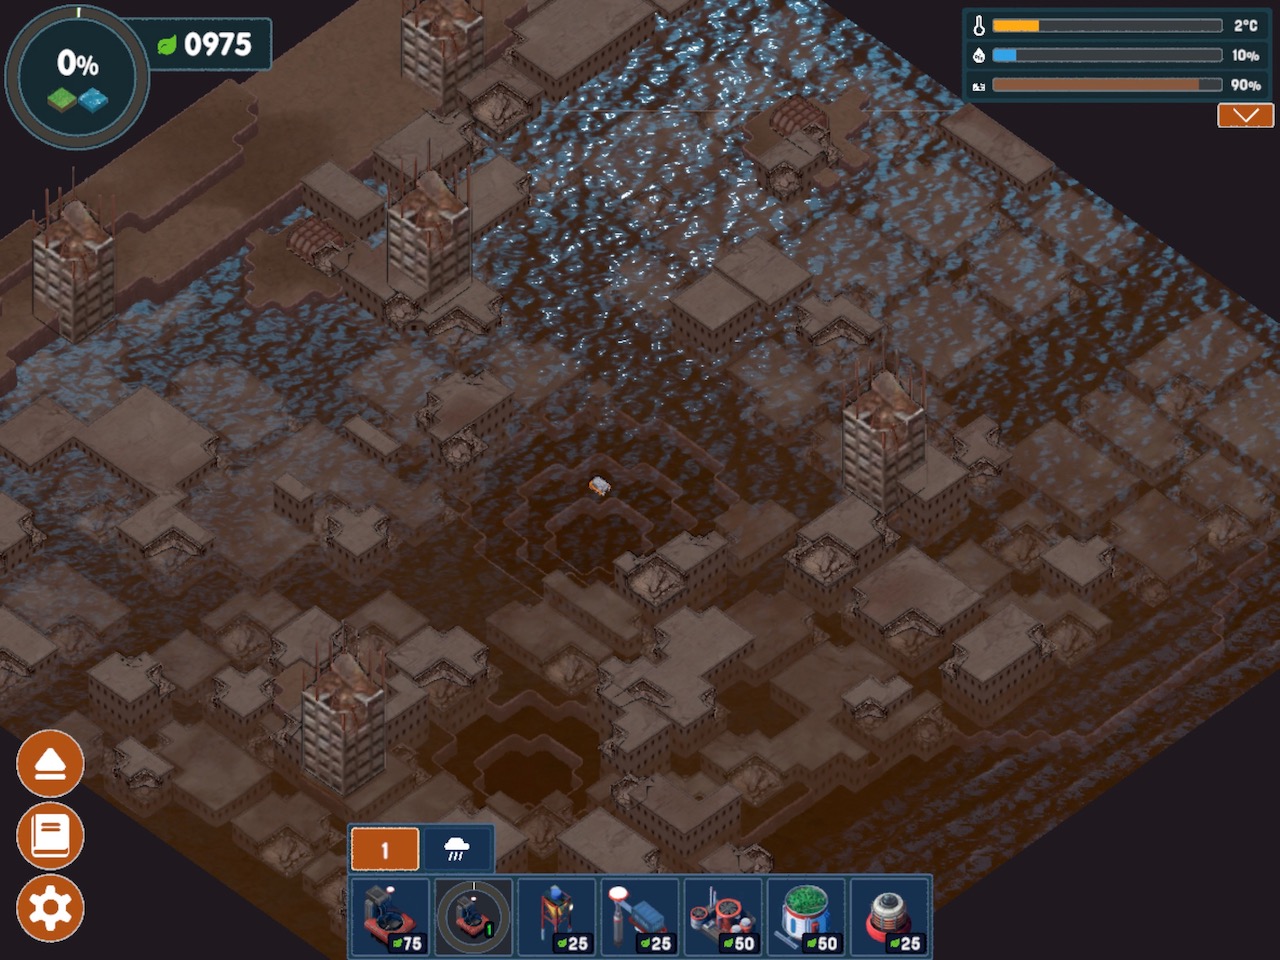 Terra Nil is an ingenious deconstruction of SimCity